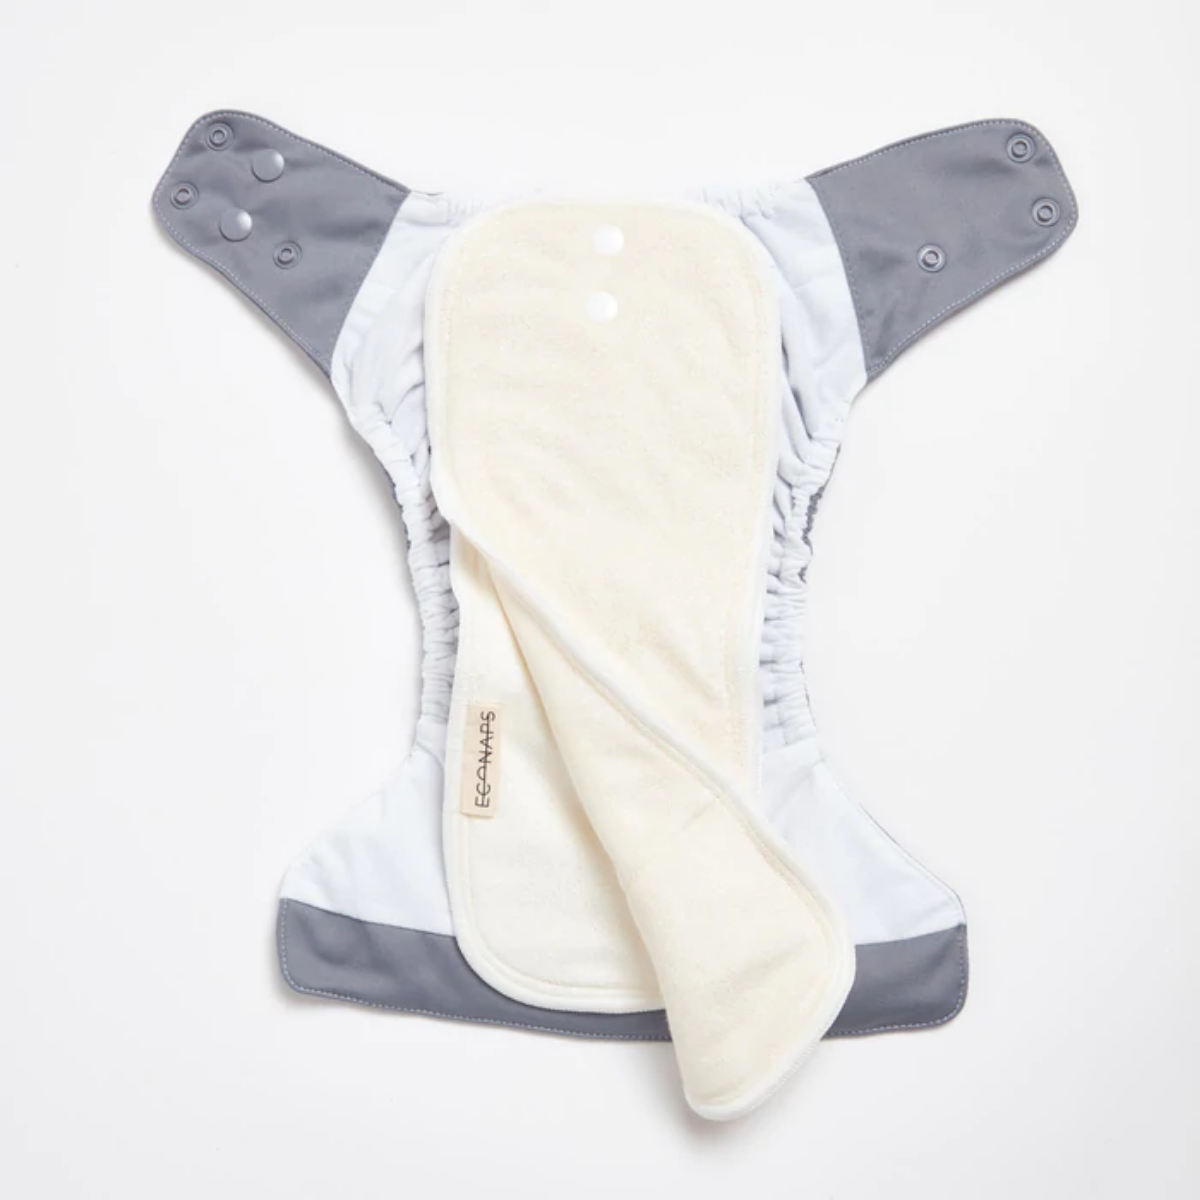 An open Midnight Blue 2.0 Modern Cloth Nappy by EcoNaps on a white surface.